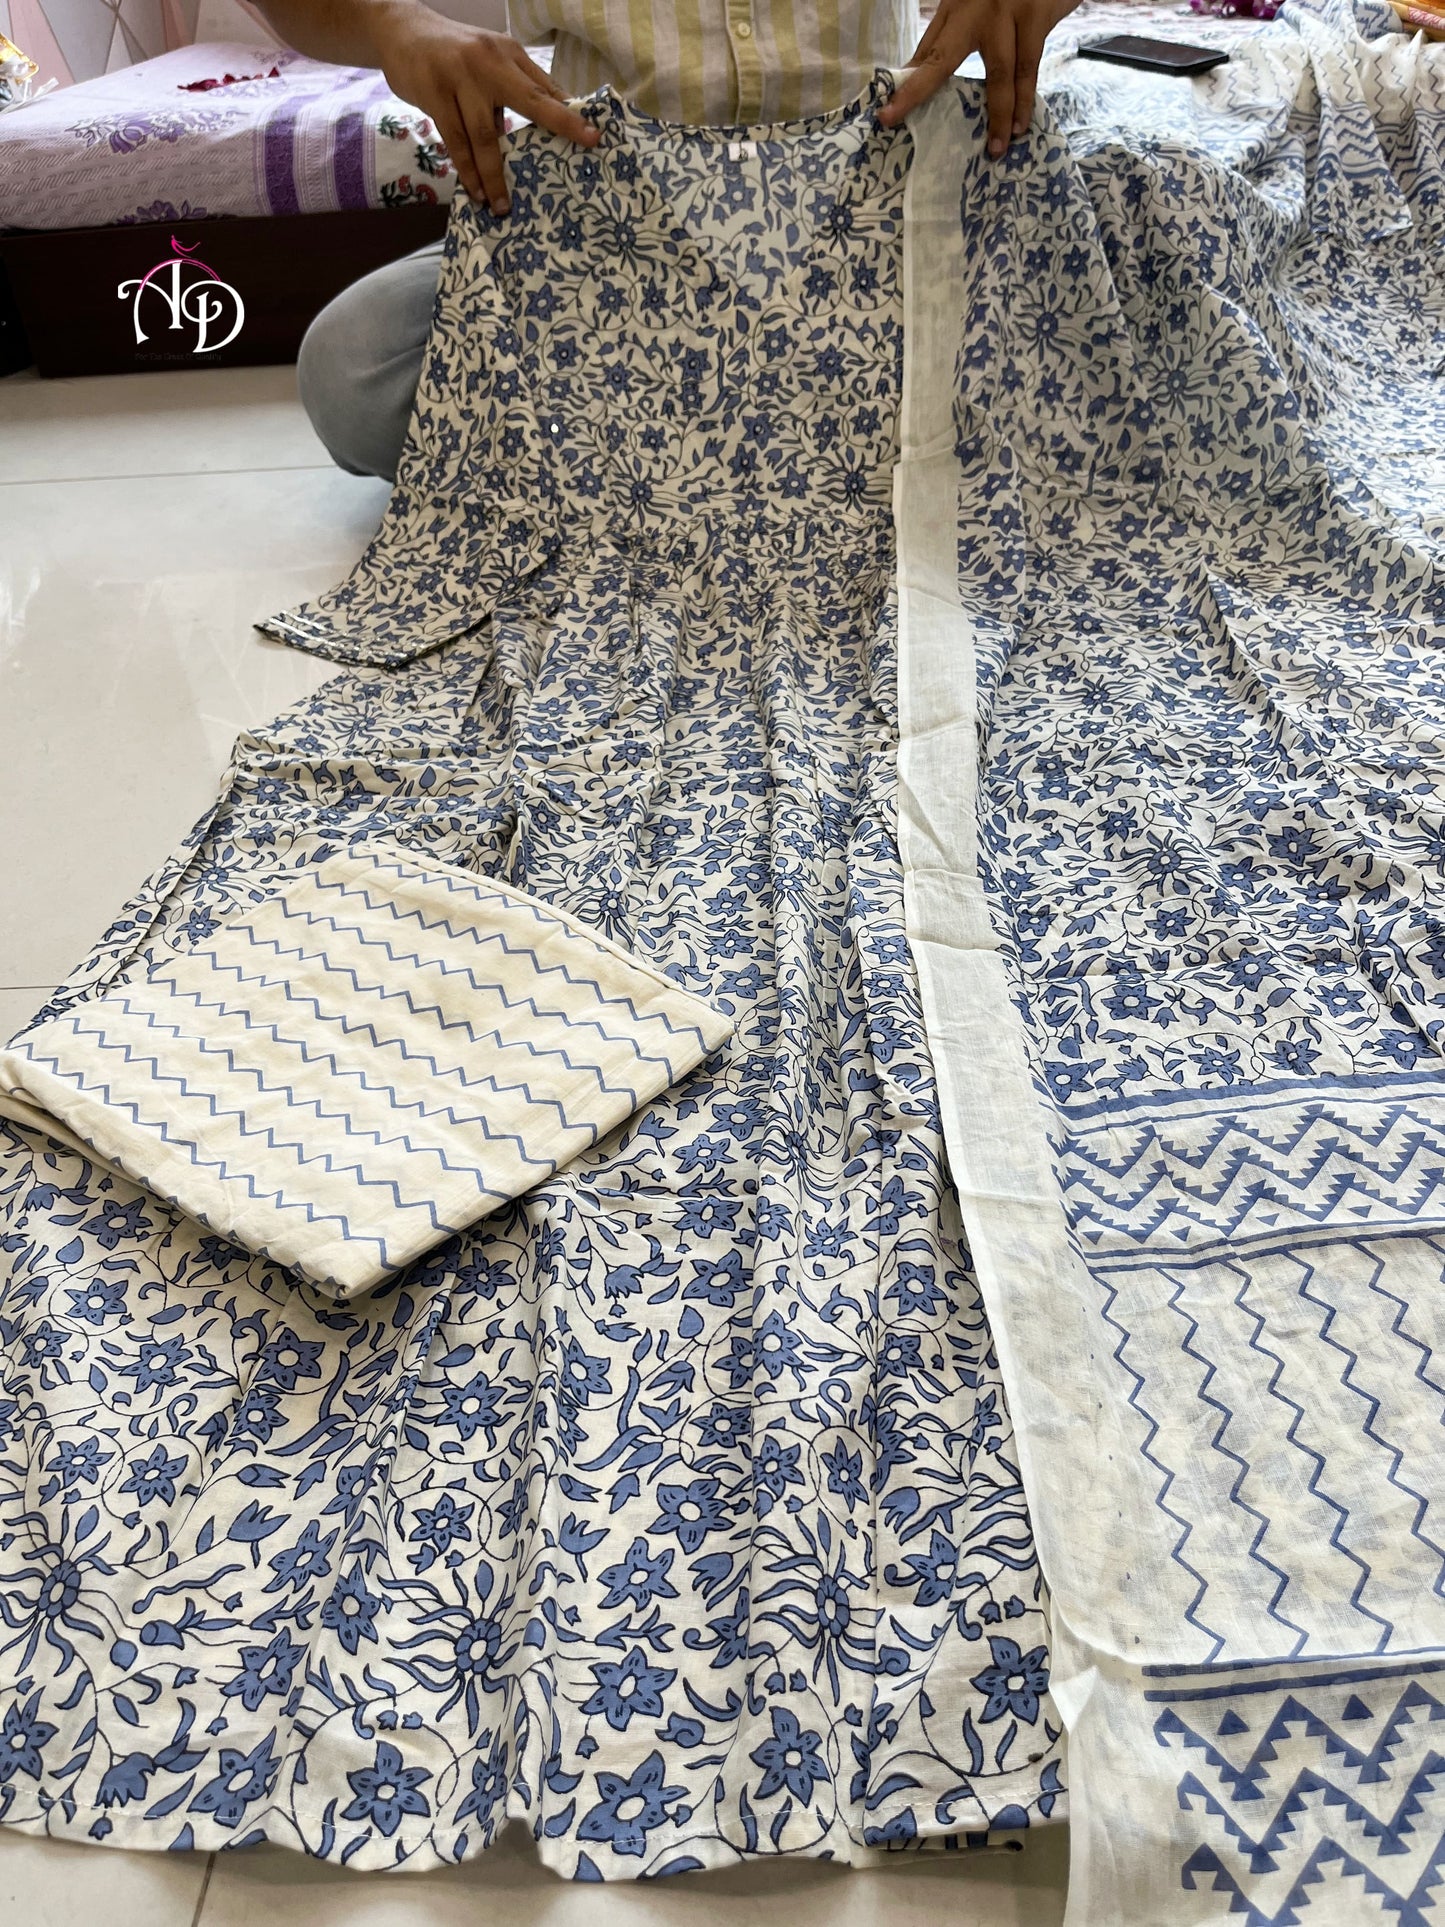 Buy Latest Cotton Suits for Women Online in India